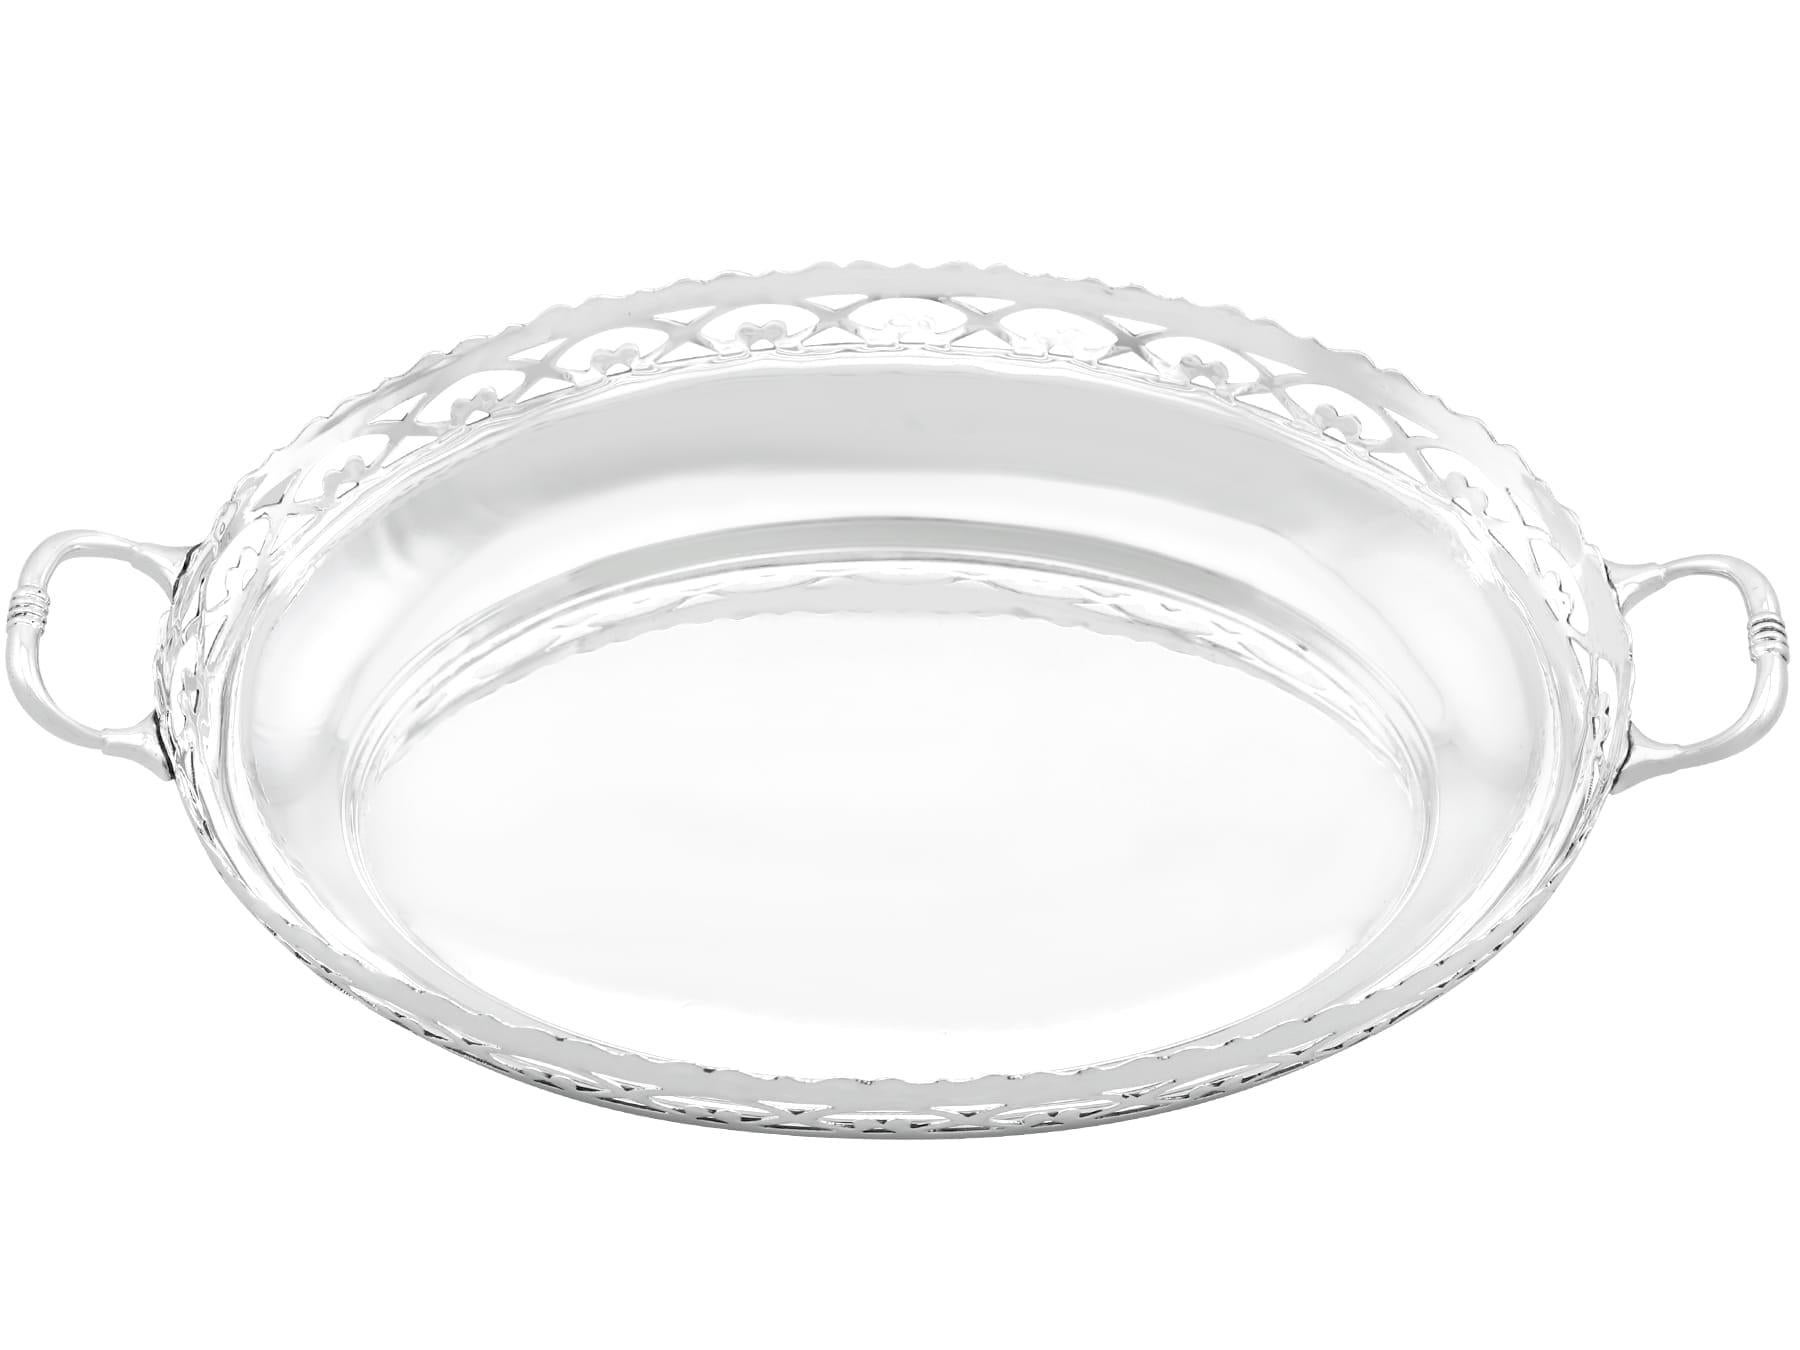 Sterling Silver Bread Dish - Antique George V (1932)

An exceptional, fine and impressive antique George V English sterling silver bread dish; an addition to our dining silverware collection


Description
This exceptional, fine and impressive